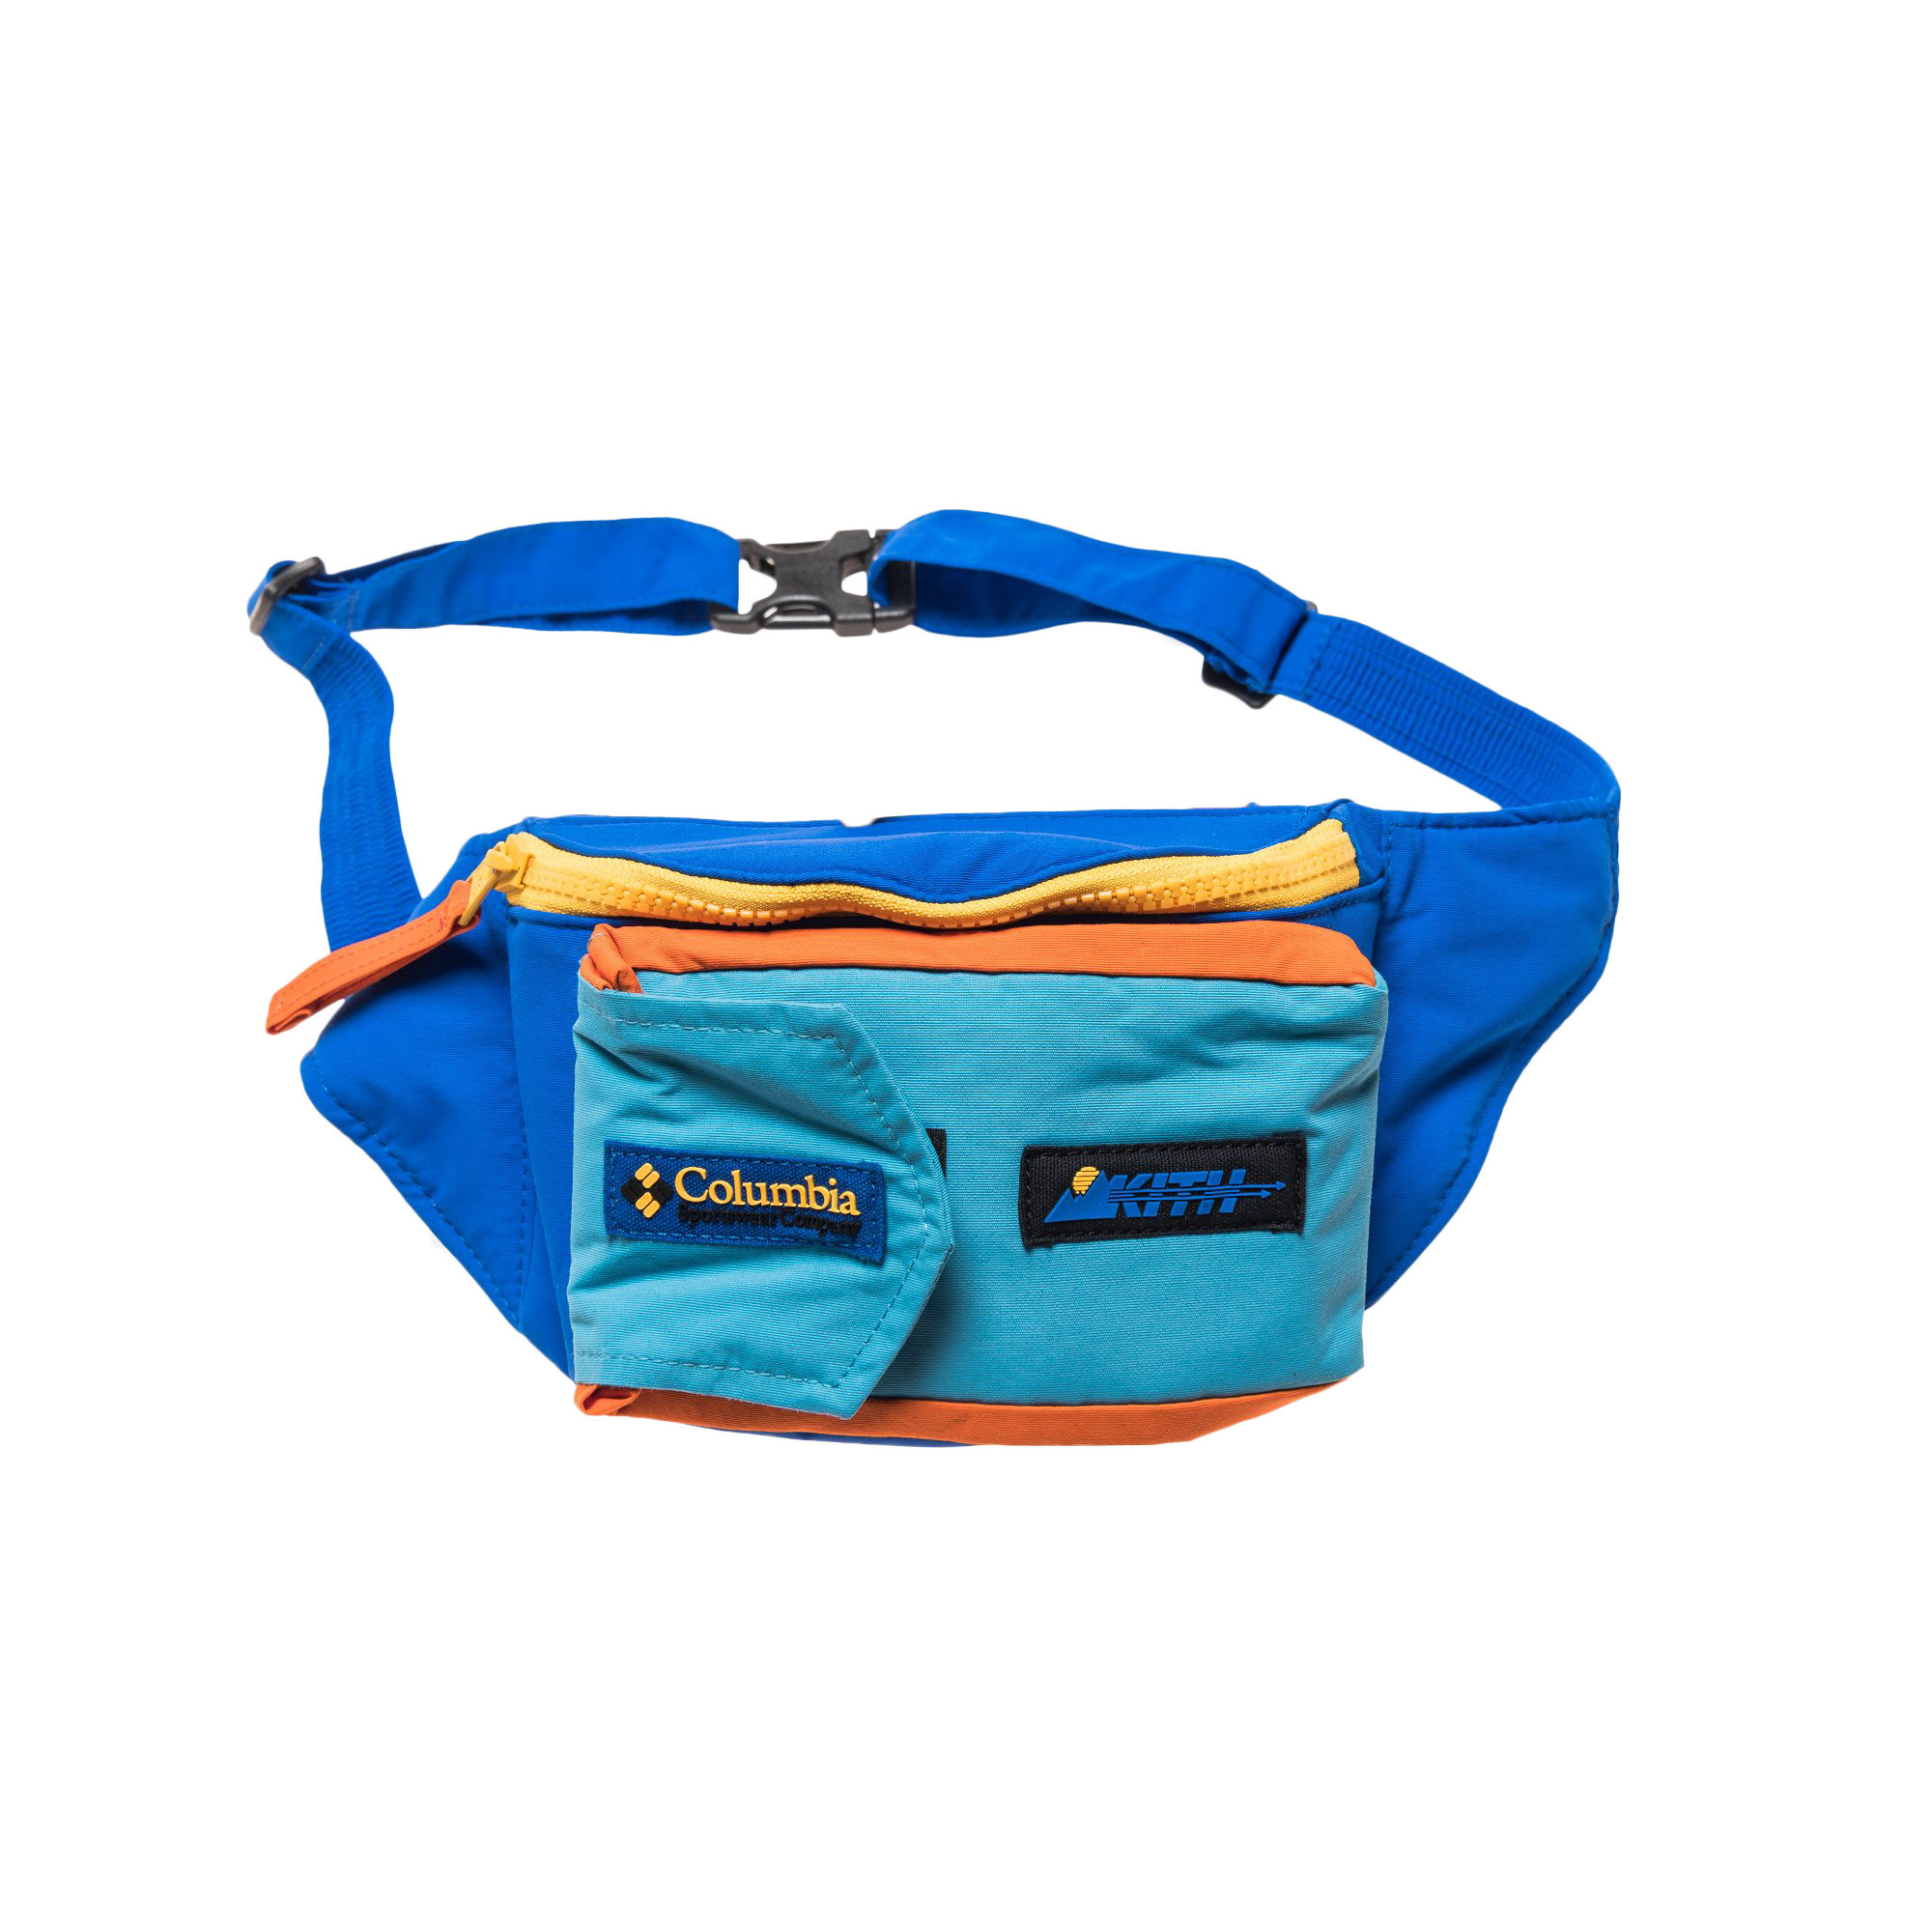 Kith x Columbia Popo Sling Pack Blue Macaw